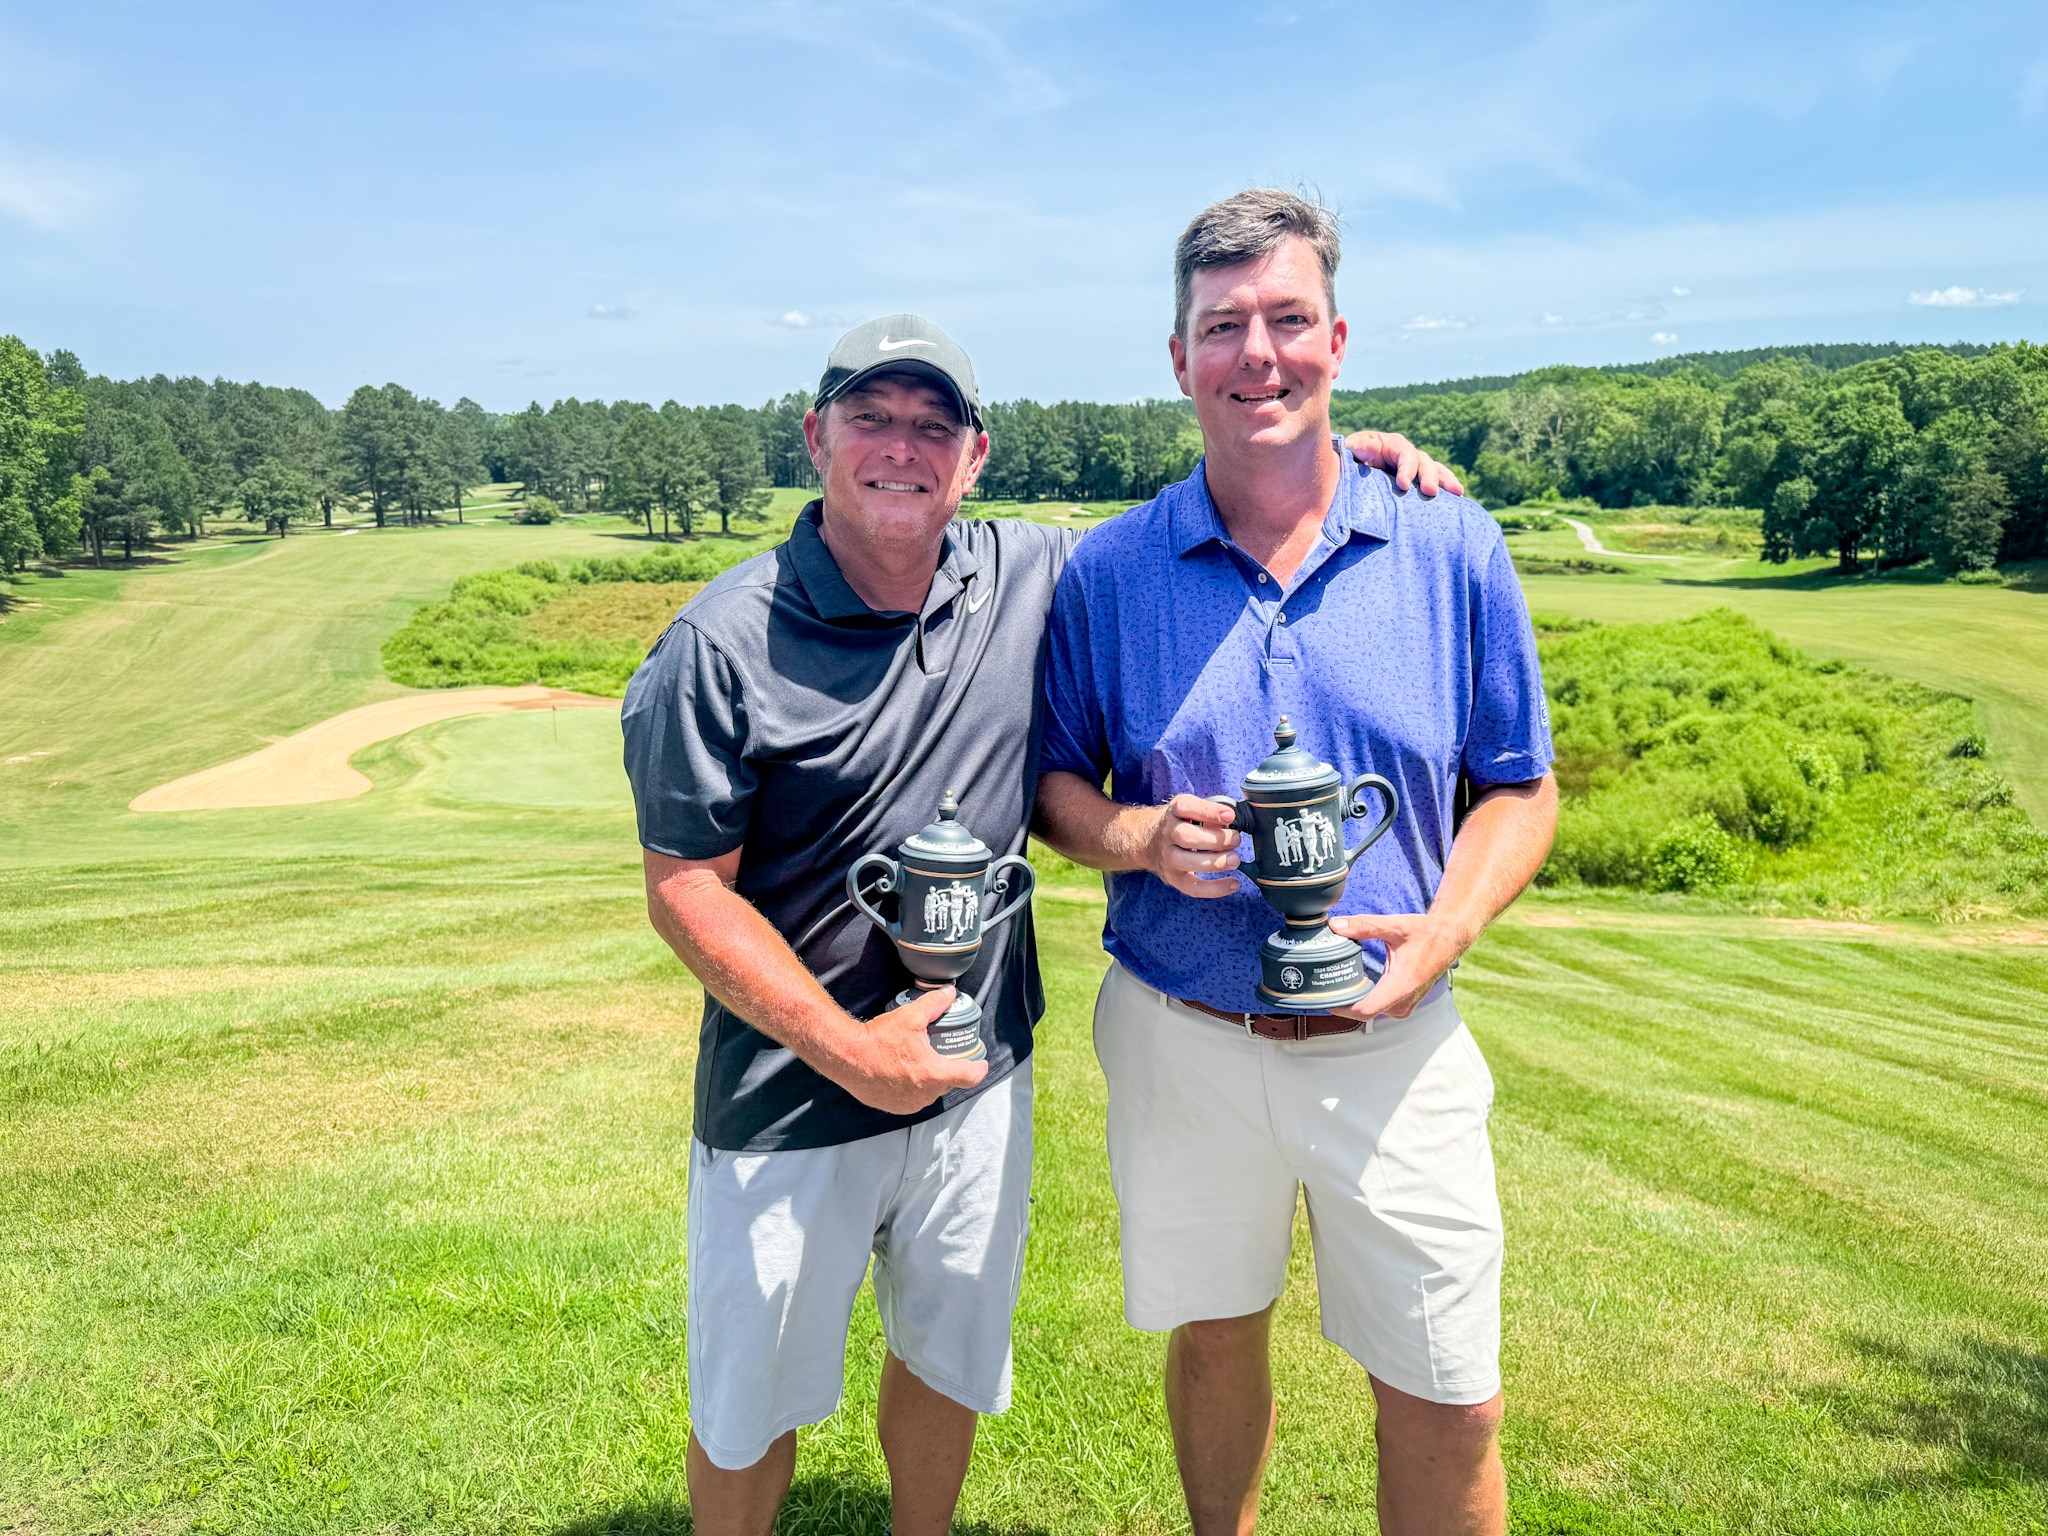 57th Annual Four-Ball Champions - Robbie Biershenk and Garland Ferrell